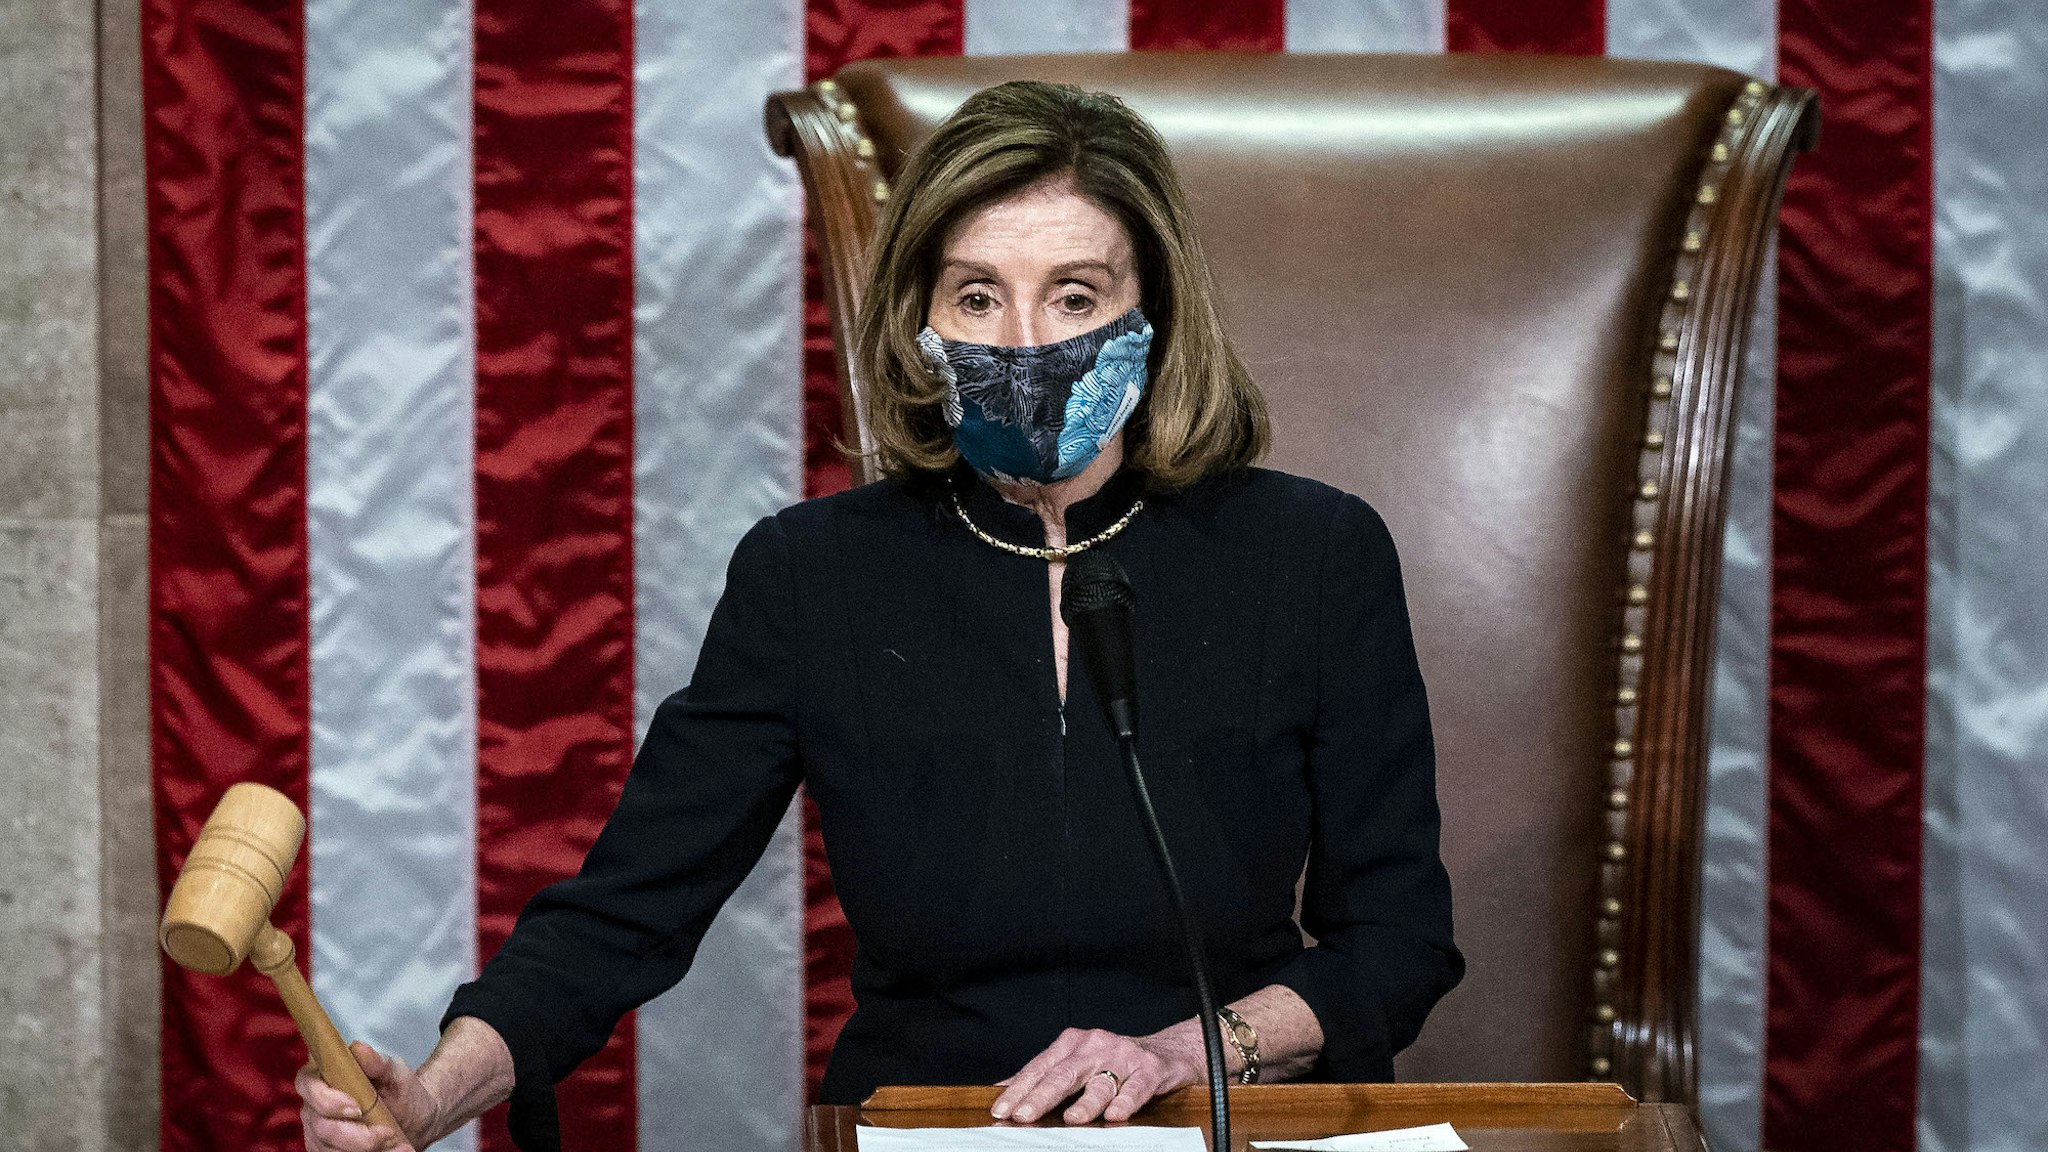 U.S. House Speaker Nancy Pelosi, a Democrat from California, wears a protective mask while banging the Speaker's gavel on the floor of the House at the U.S. Capitol in Washington, D.C., U.S., on Wednesday, Jan. 13, 2021. President Donald Trump was impeached by the U.S. House on a single charge of incitement of insurrection for his role in a deadly riot by his supporters that left five dead and the Capitol ransacked, putting an indelible stain on his legacy with only a week left in his term. Photographer: Al Drago/Bloomberg